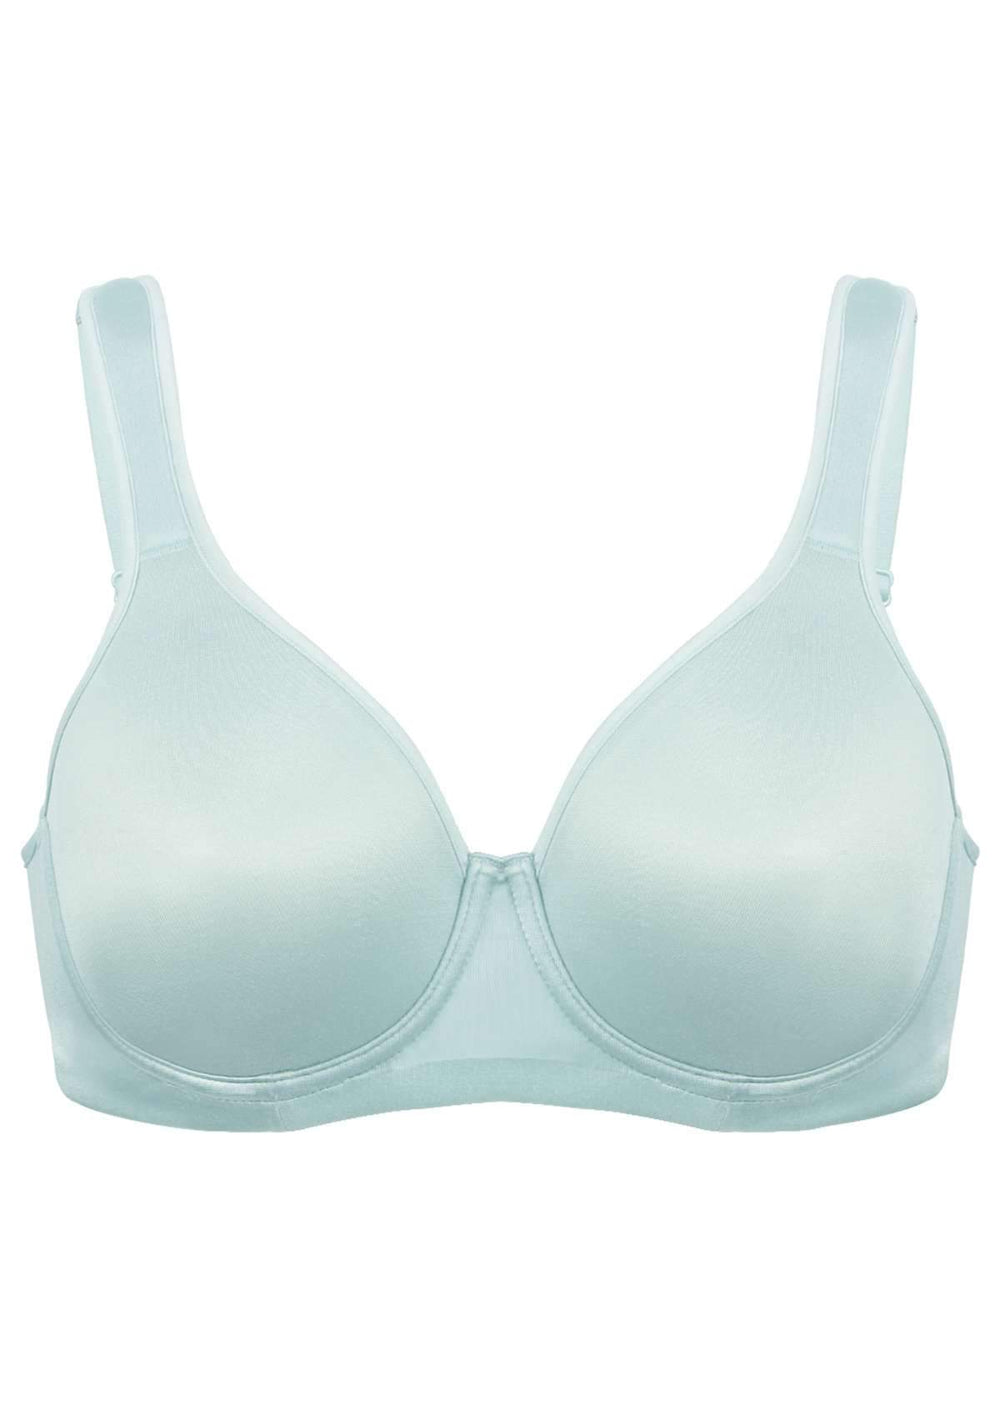 Barley There Unbranded Full Coverage Wireless Unlined Bra Lot Size XL  #B4319